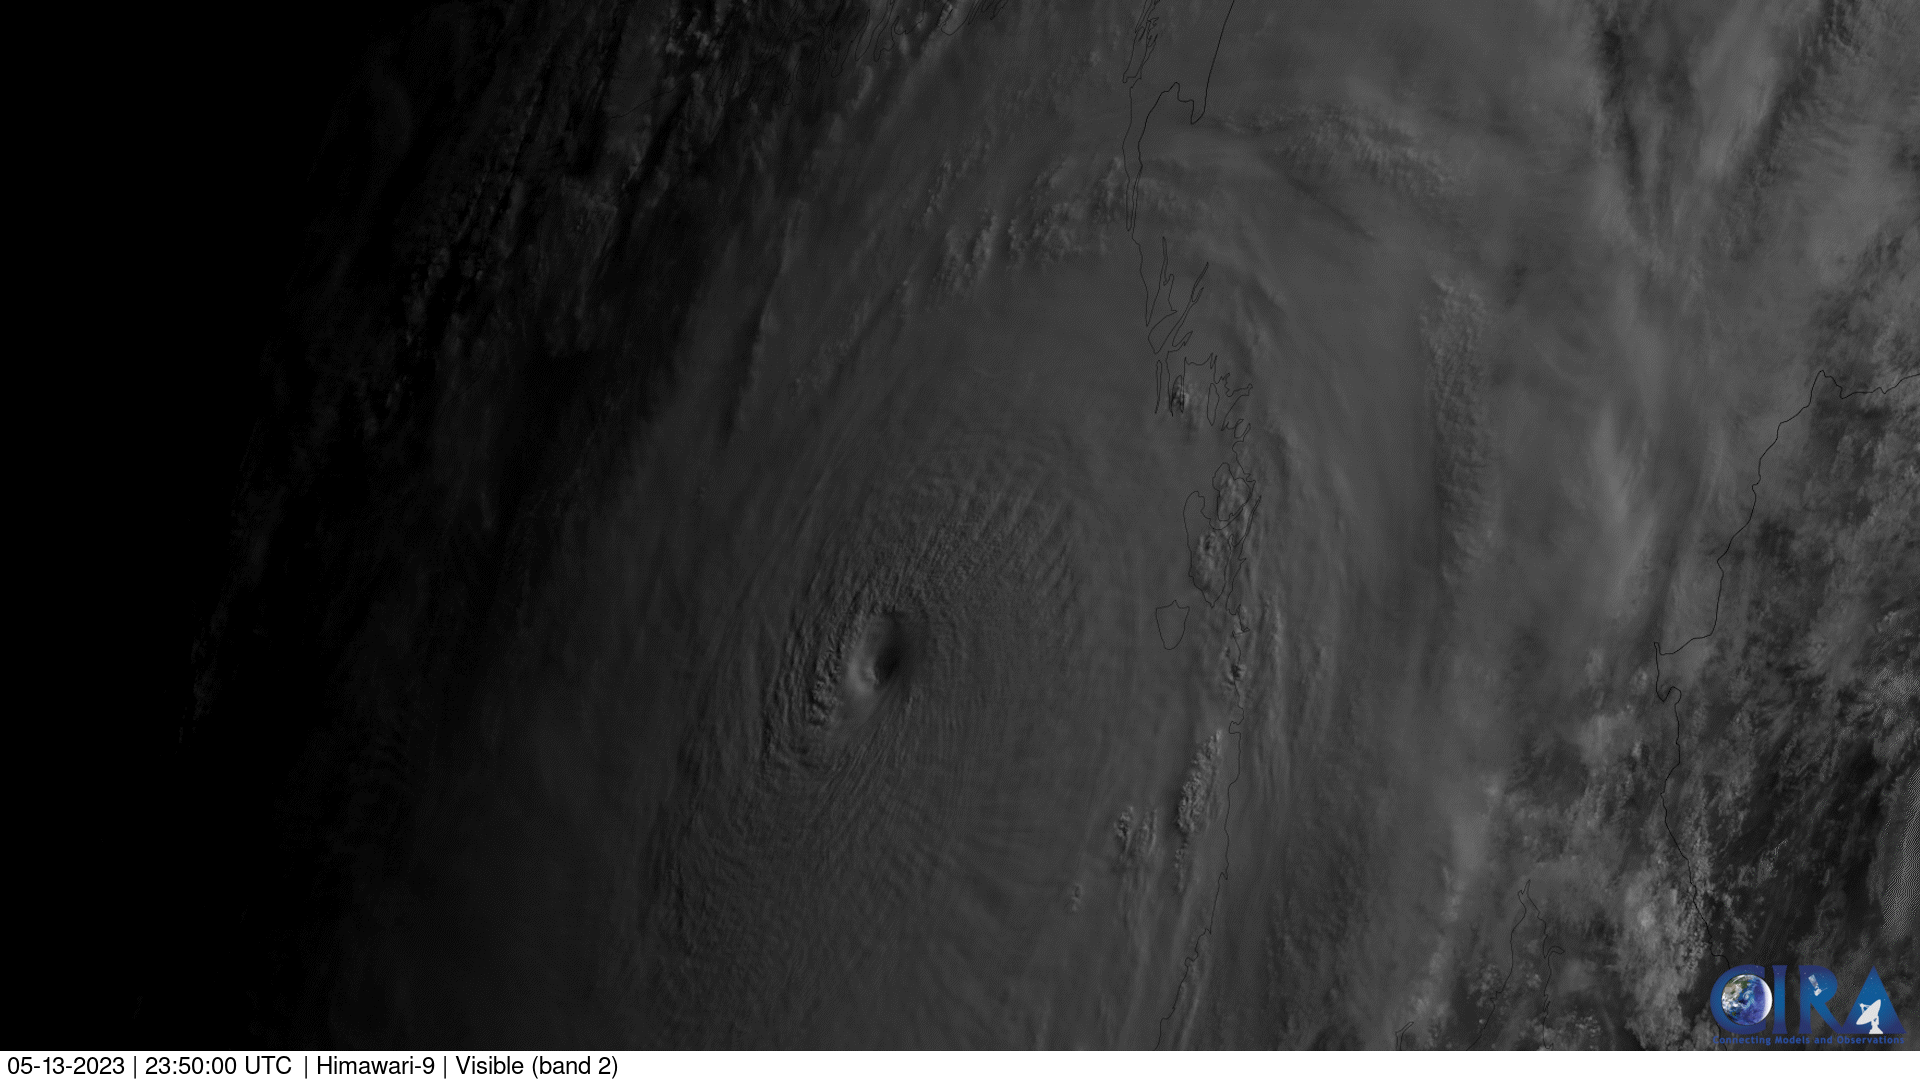 Image of a typhoon over the Bay of Bengal